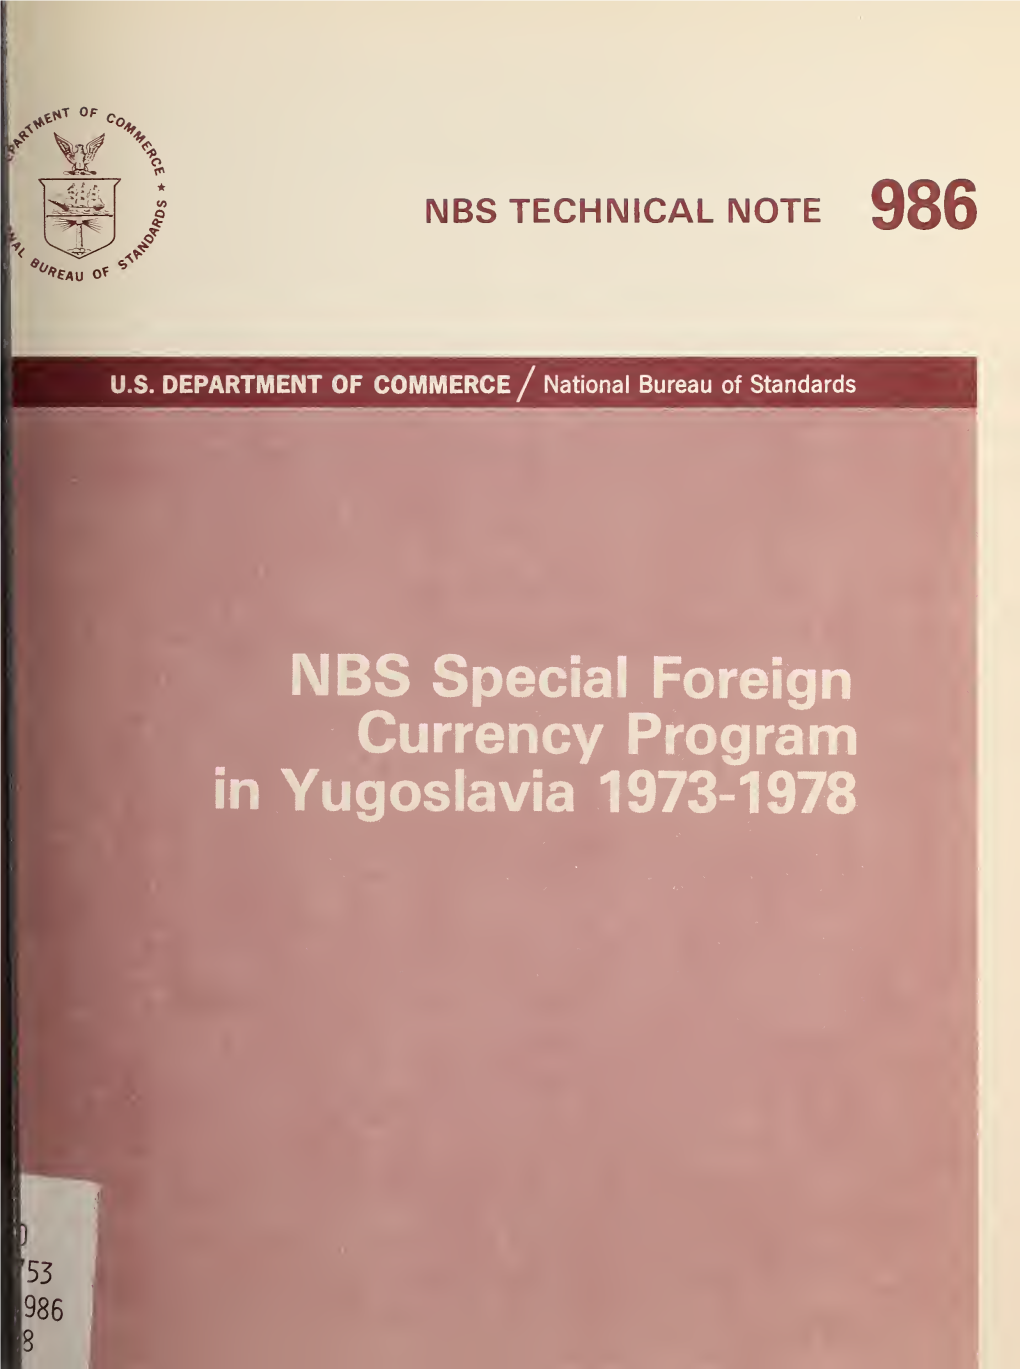 NBS Special Foreign Currency Program in Yugoslavia 1973-1978